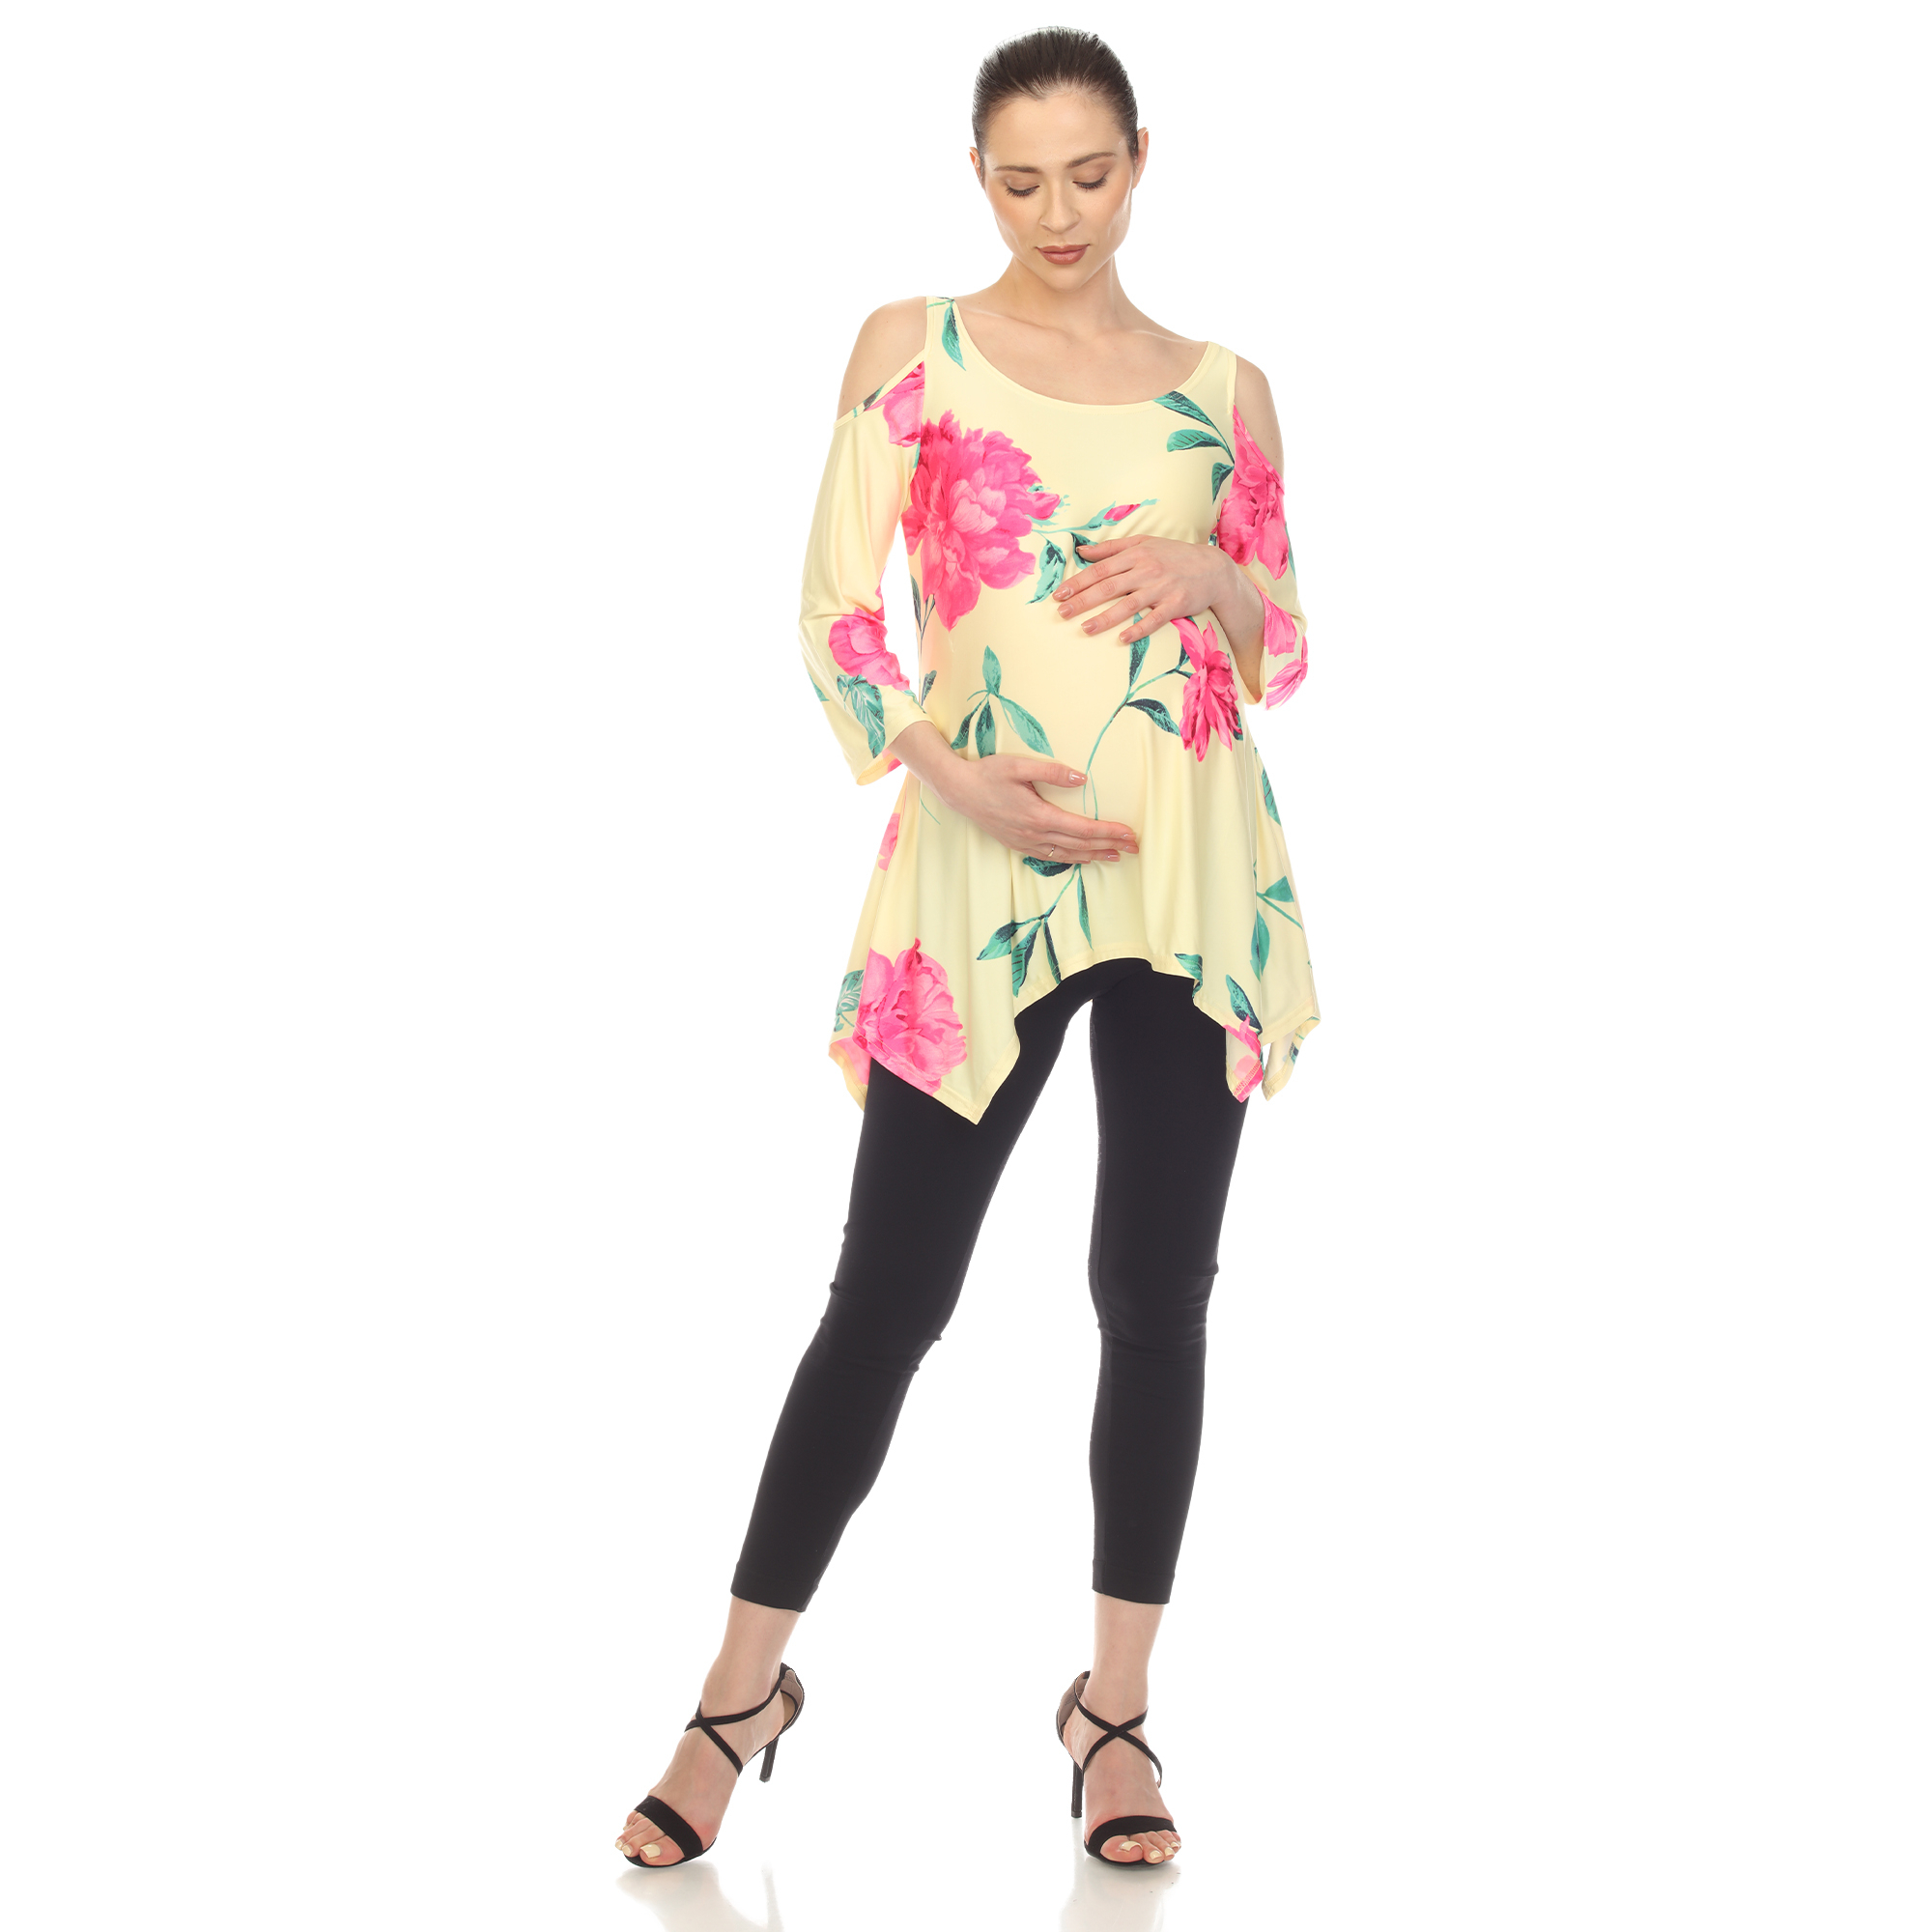 White Mark Women's Maternity Floral Cold Shoulder Tunic Top - Yellow/Pink, Medium